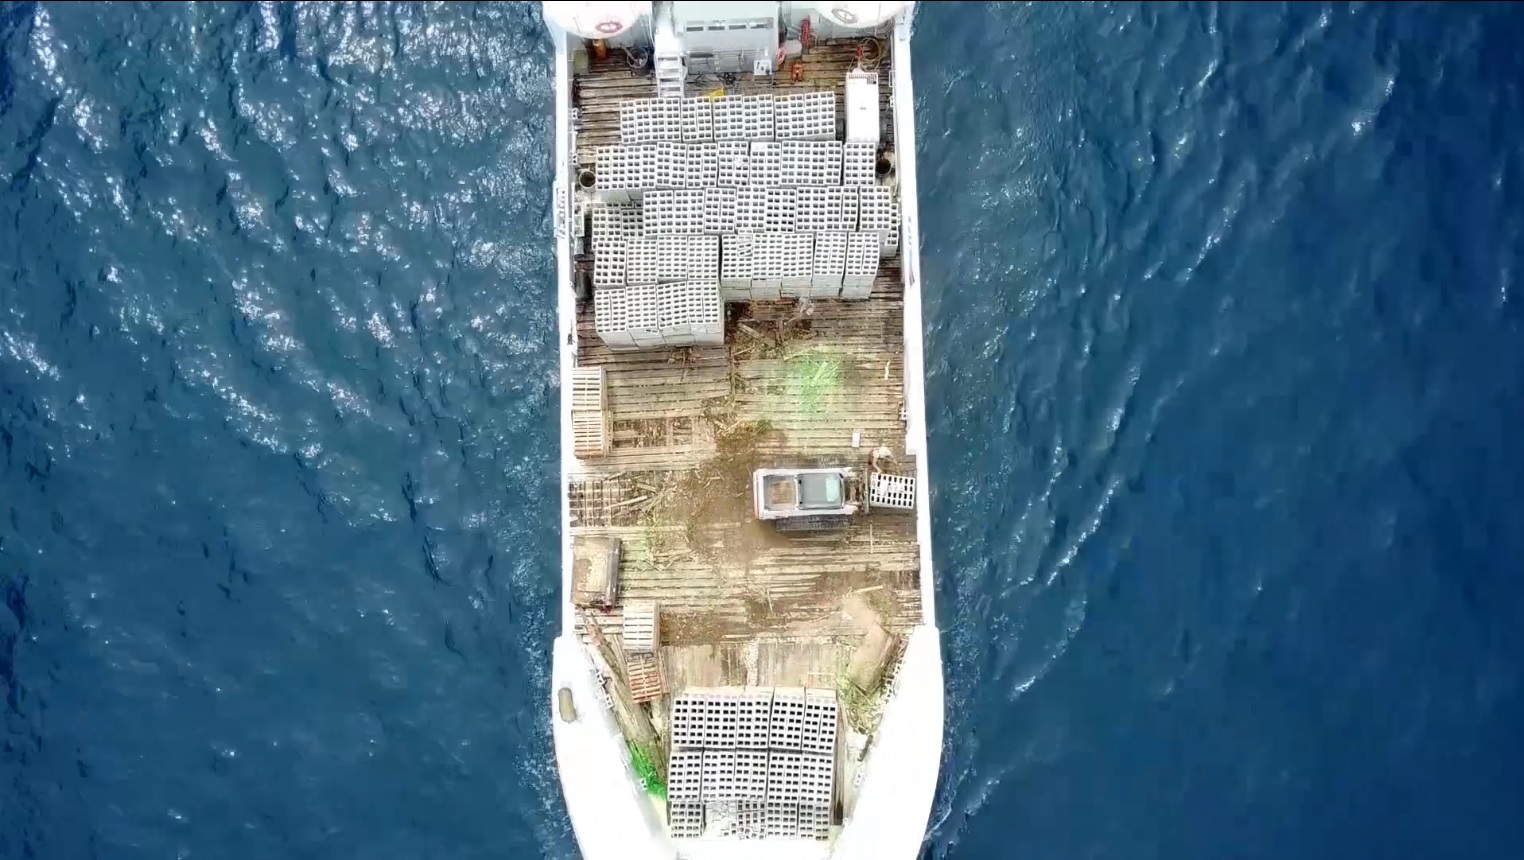 Boat carrying concrete ties for artificial reef